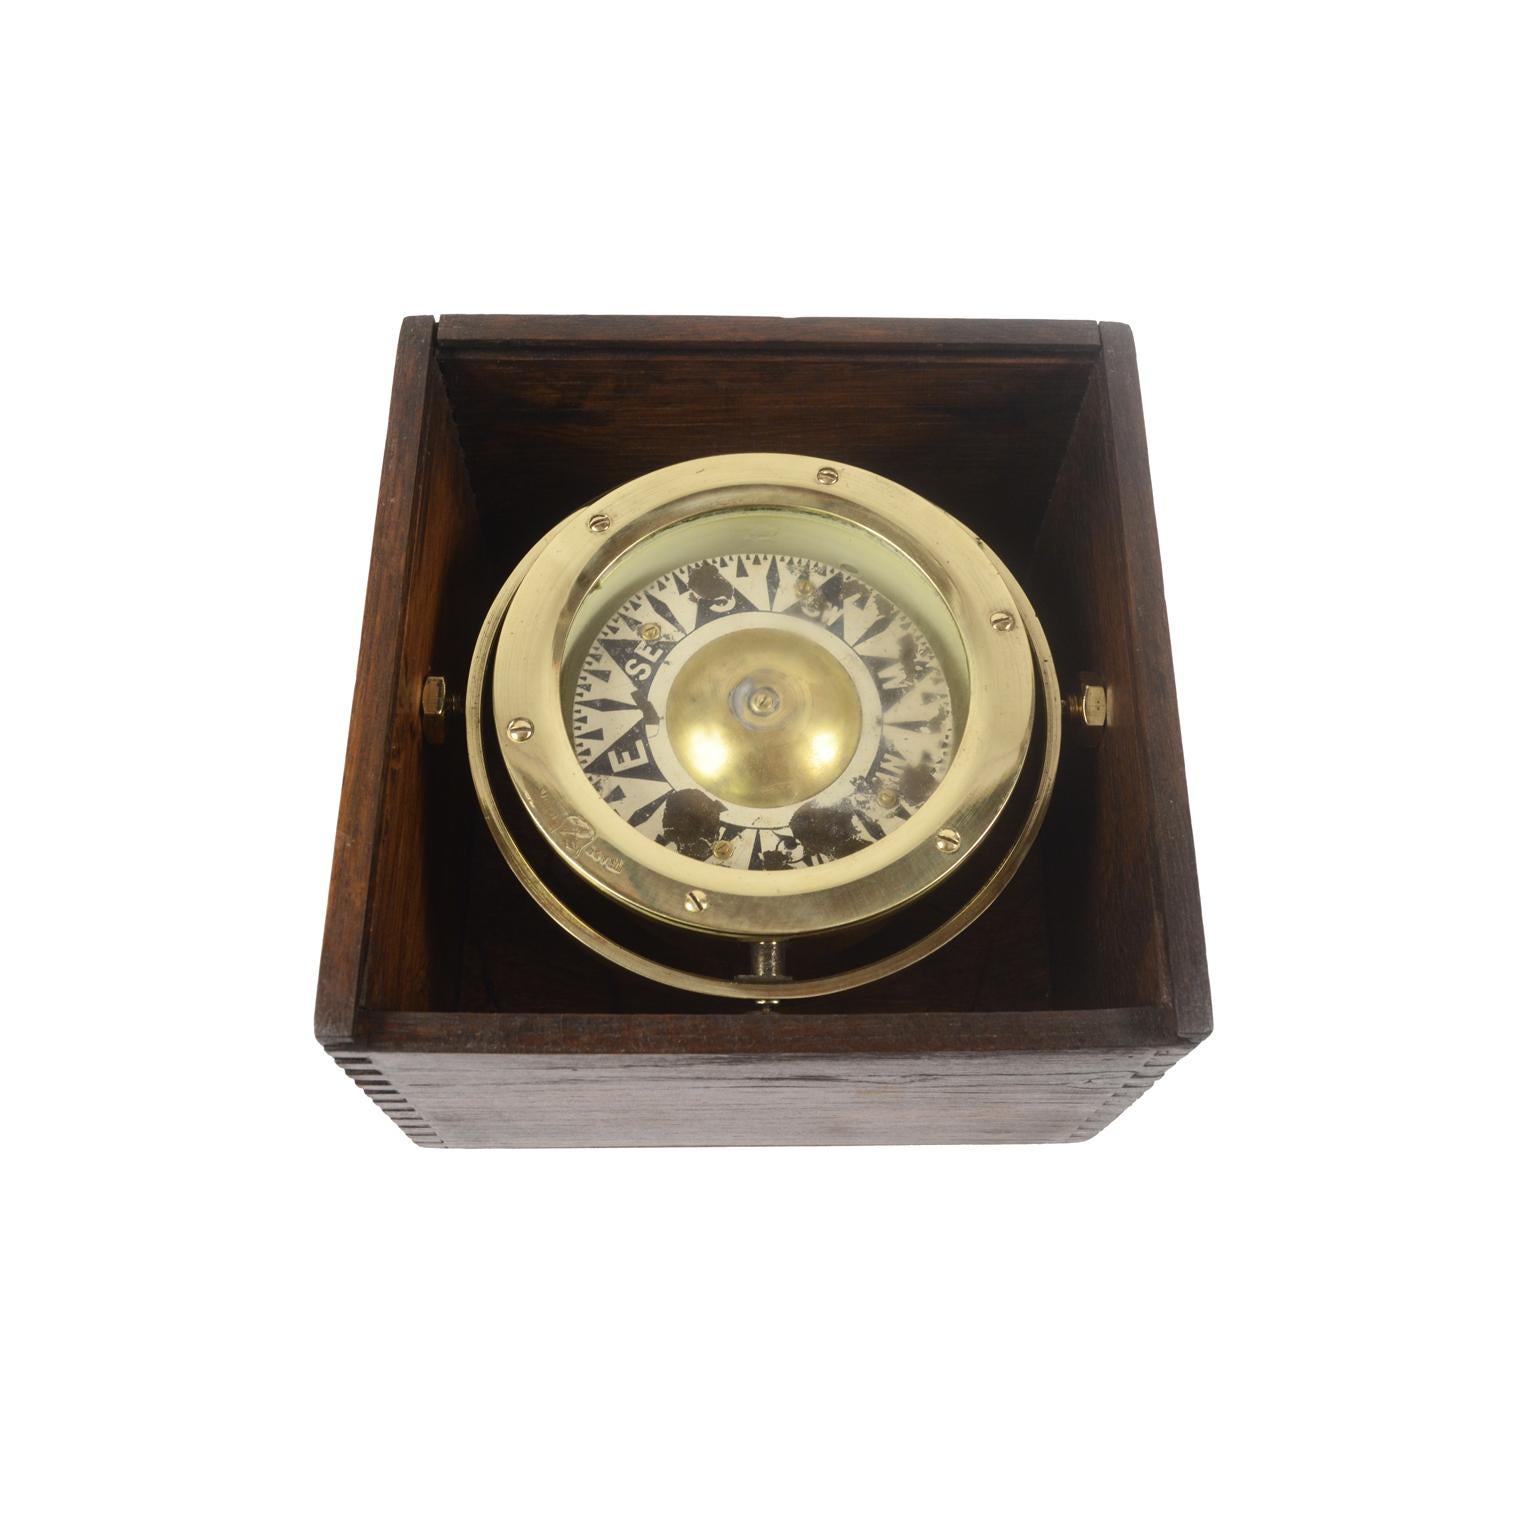 Magnetic compass on universal joint in its original wooden box with slot lid, signed with a trade mark brass emblem engraved with two crossed arrows within a shield, from the end of the 19th century. The compass consists of a cylindrical vessel in